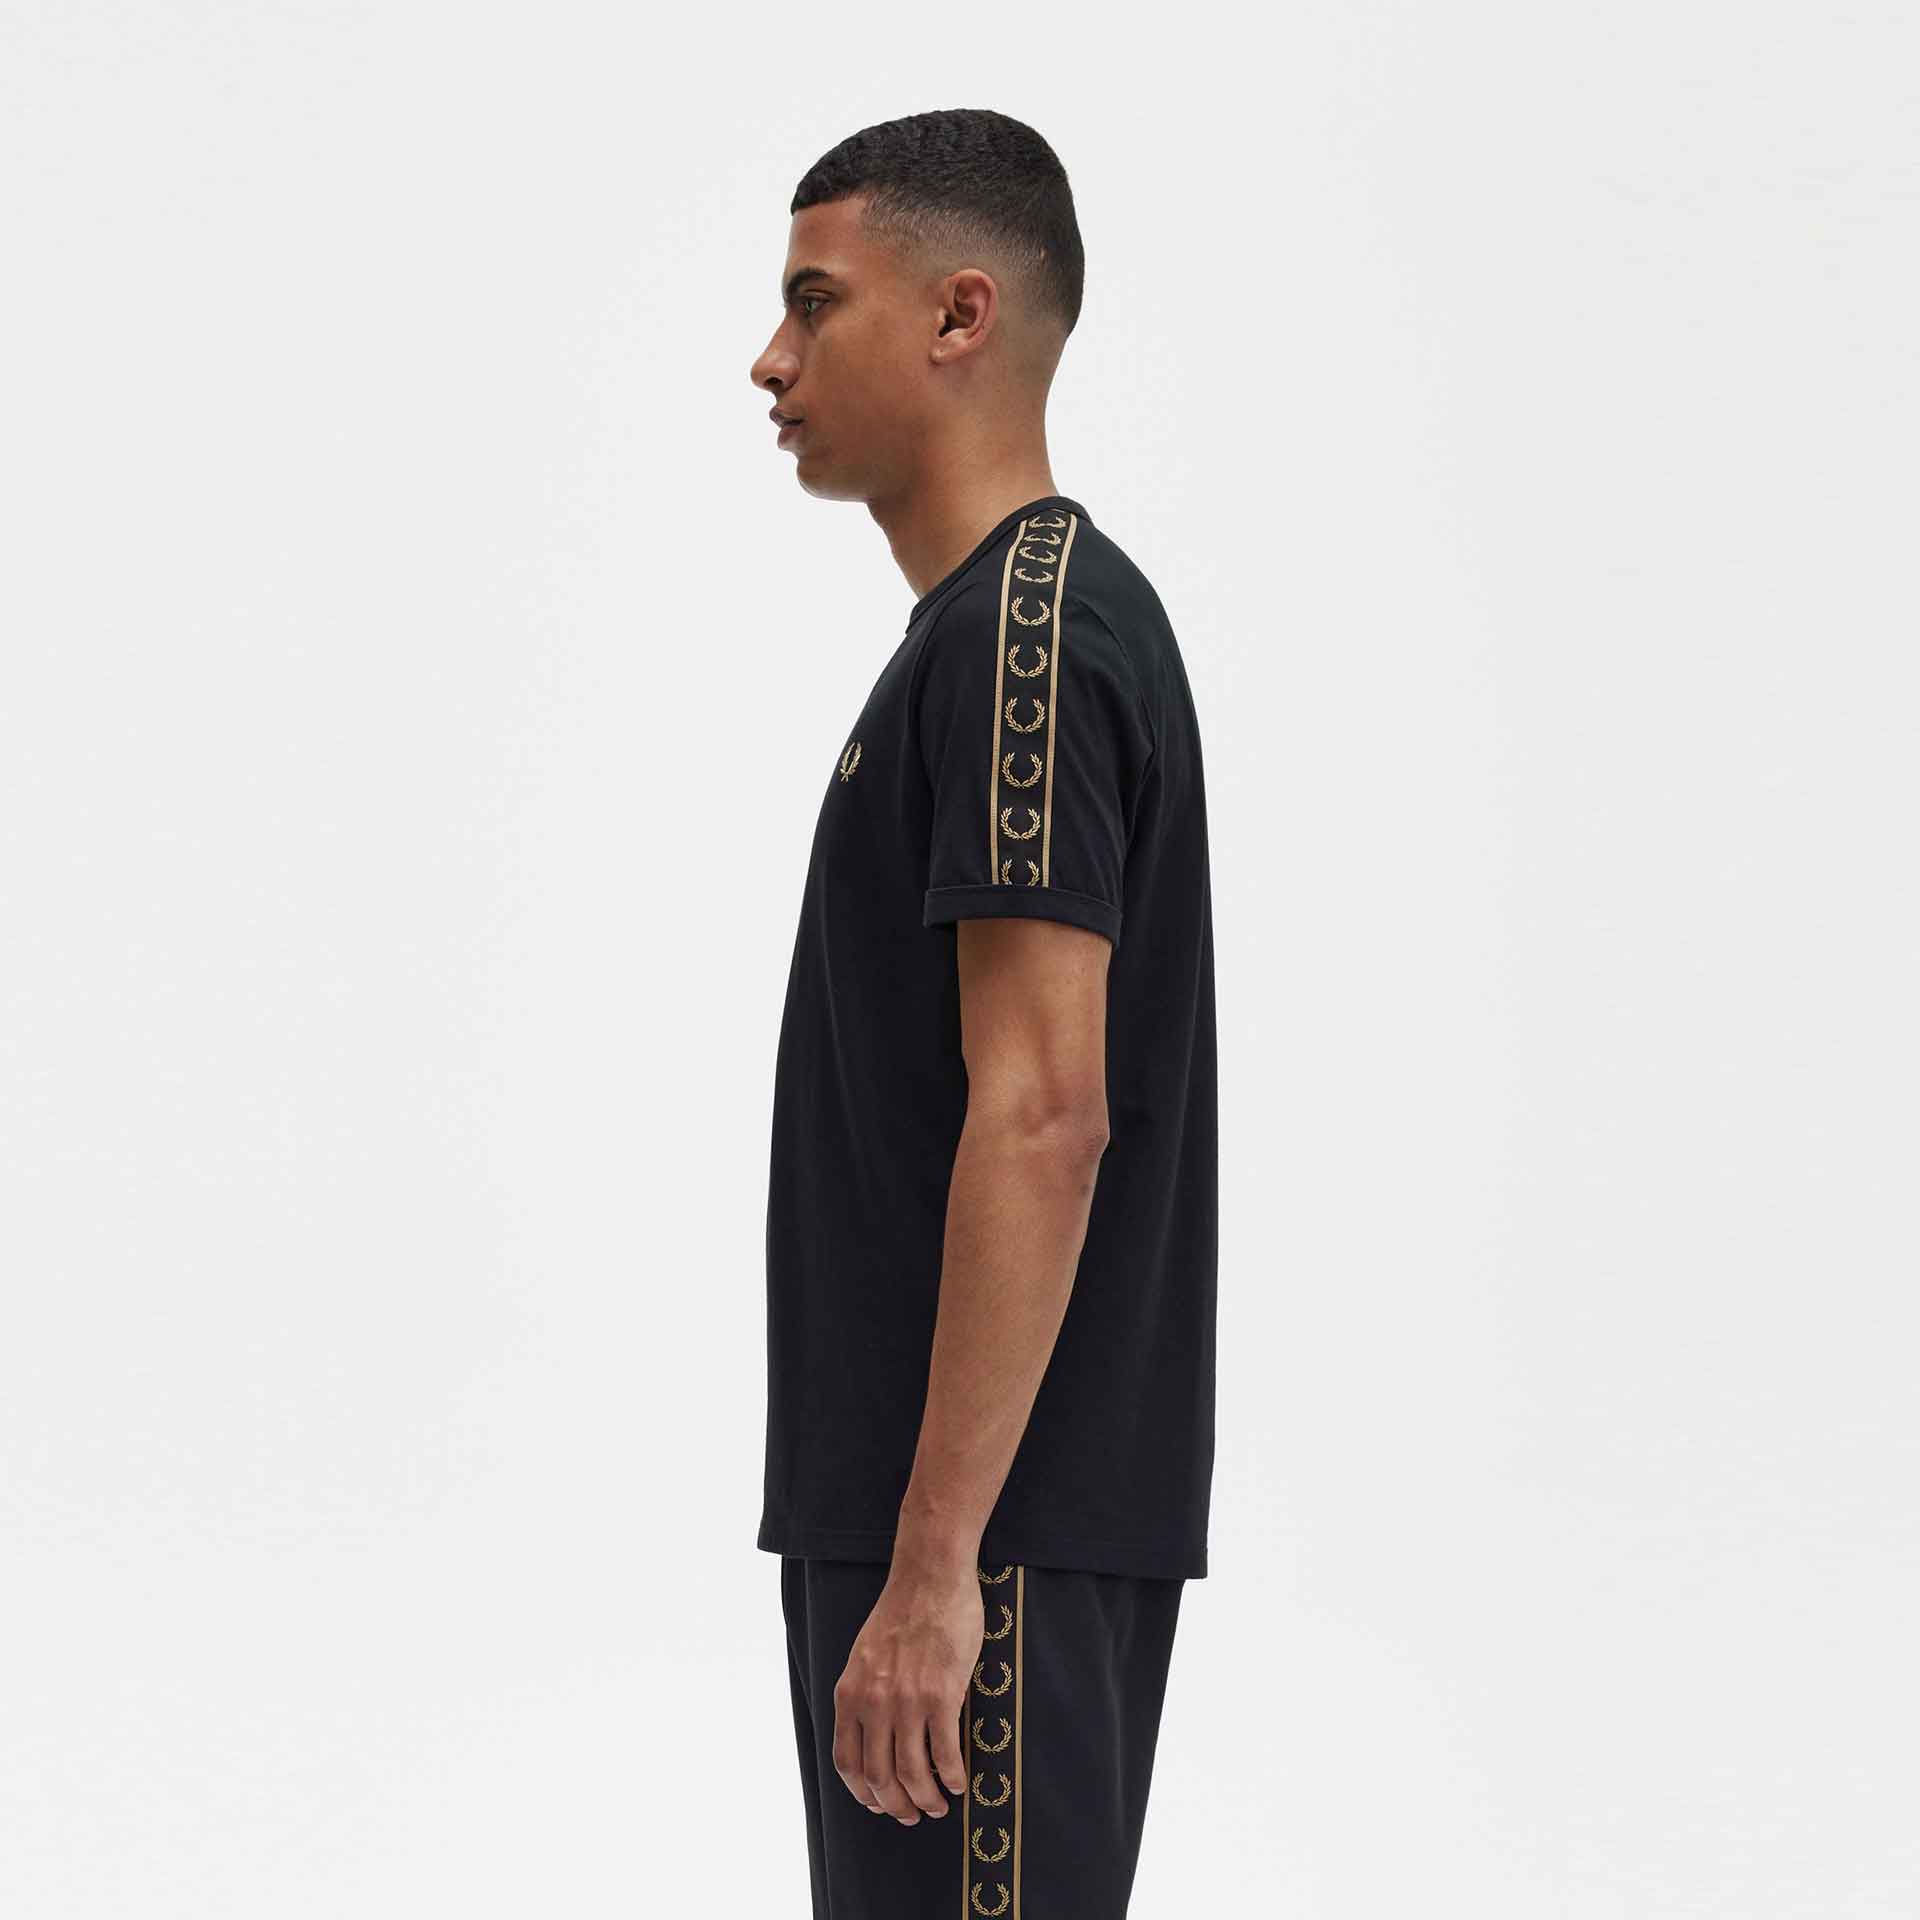 Fred Perry Contrast Tape Ringer T-Shirt Black/Black